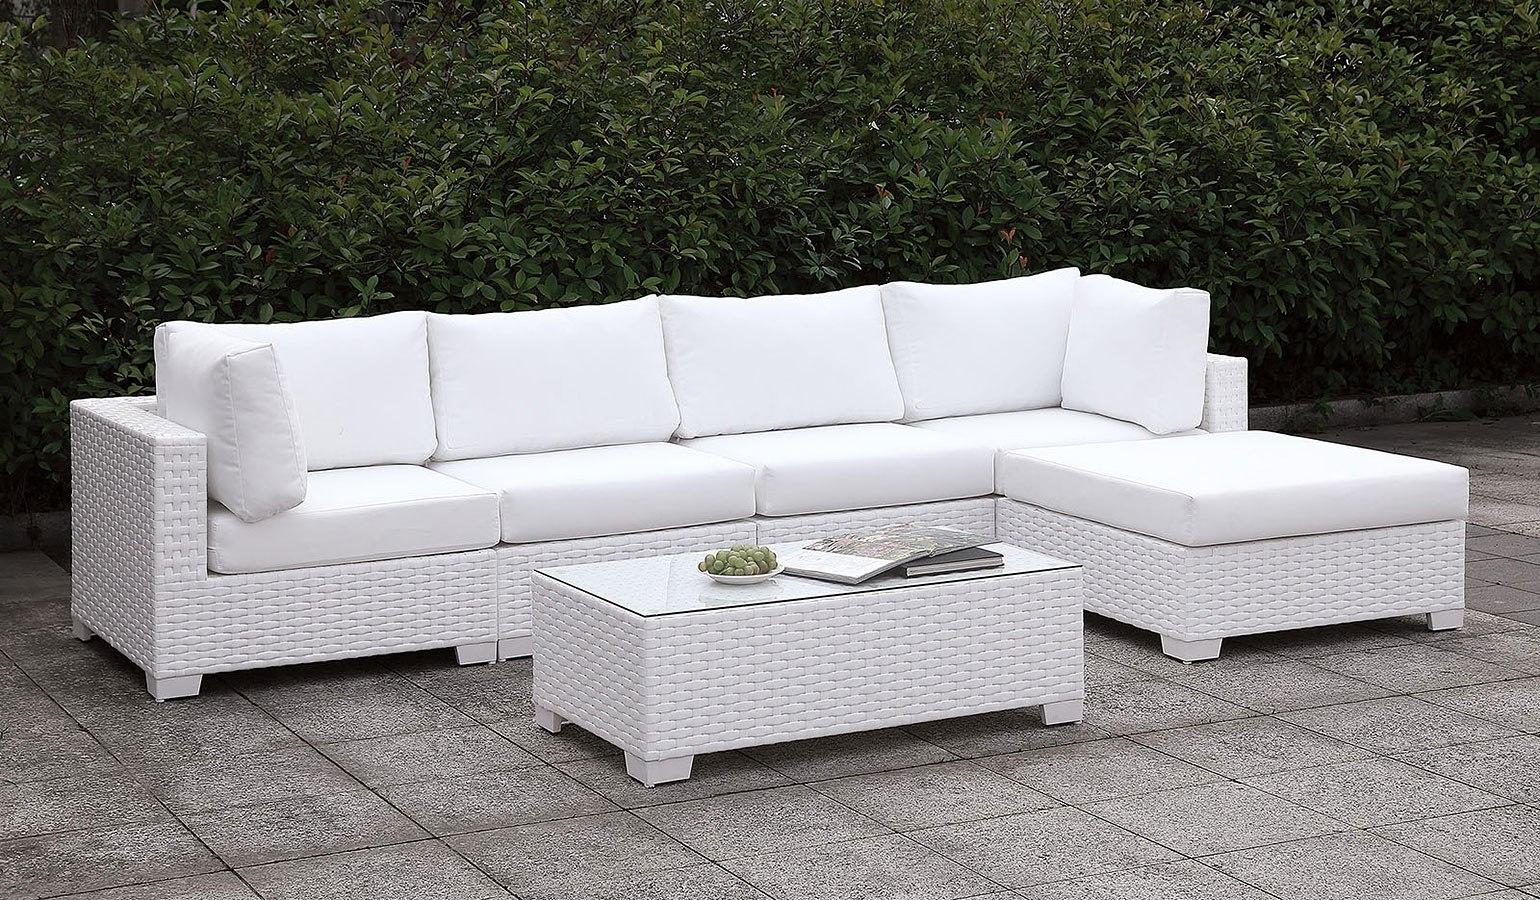 Contemporary Outdoor Sectional Set CM-OS2128WH-SET12 Somani CM-OS2128WH-SET12 in White Wicker